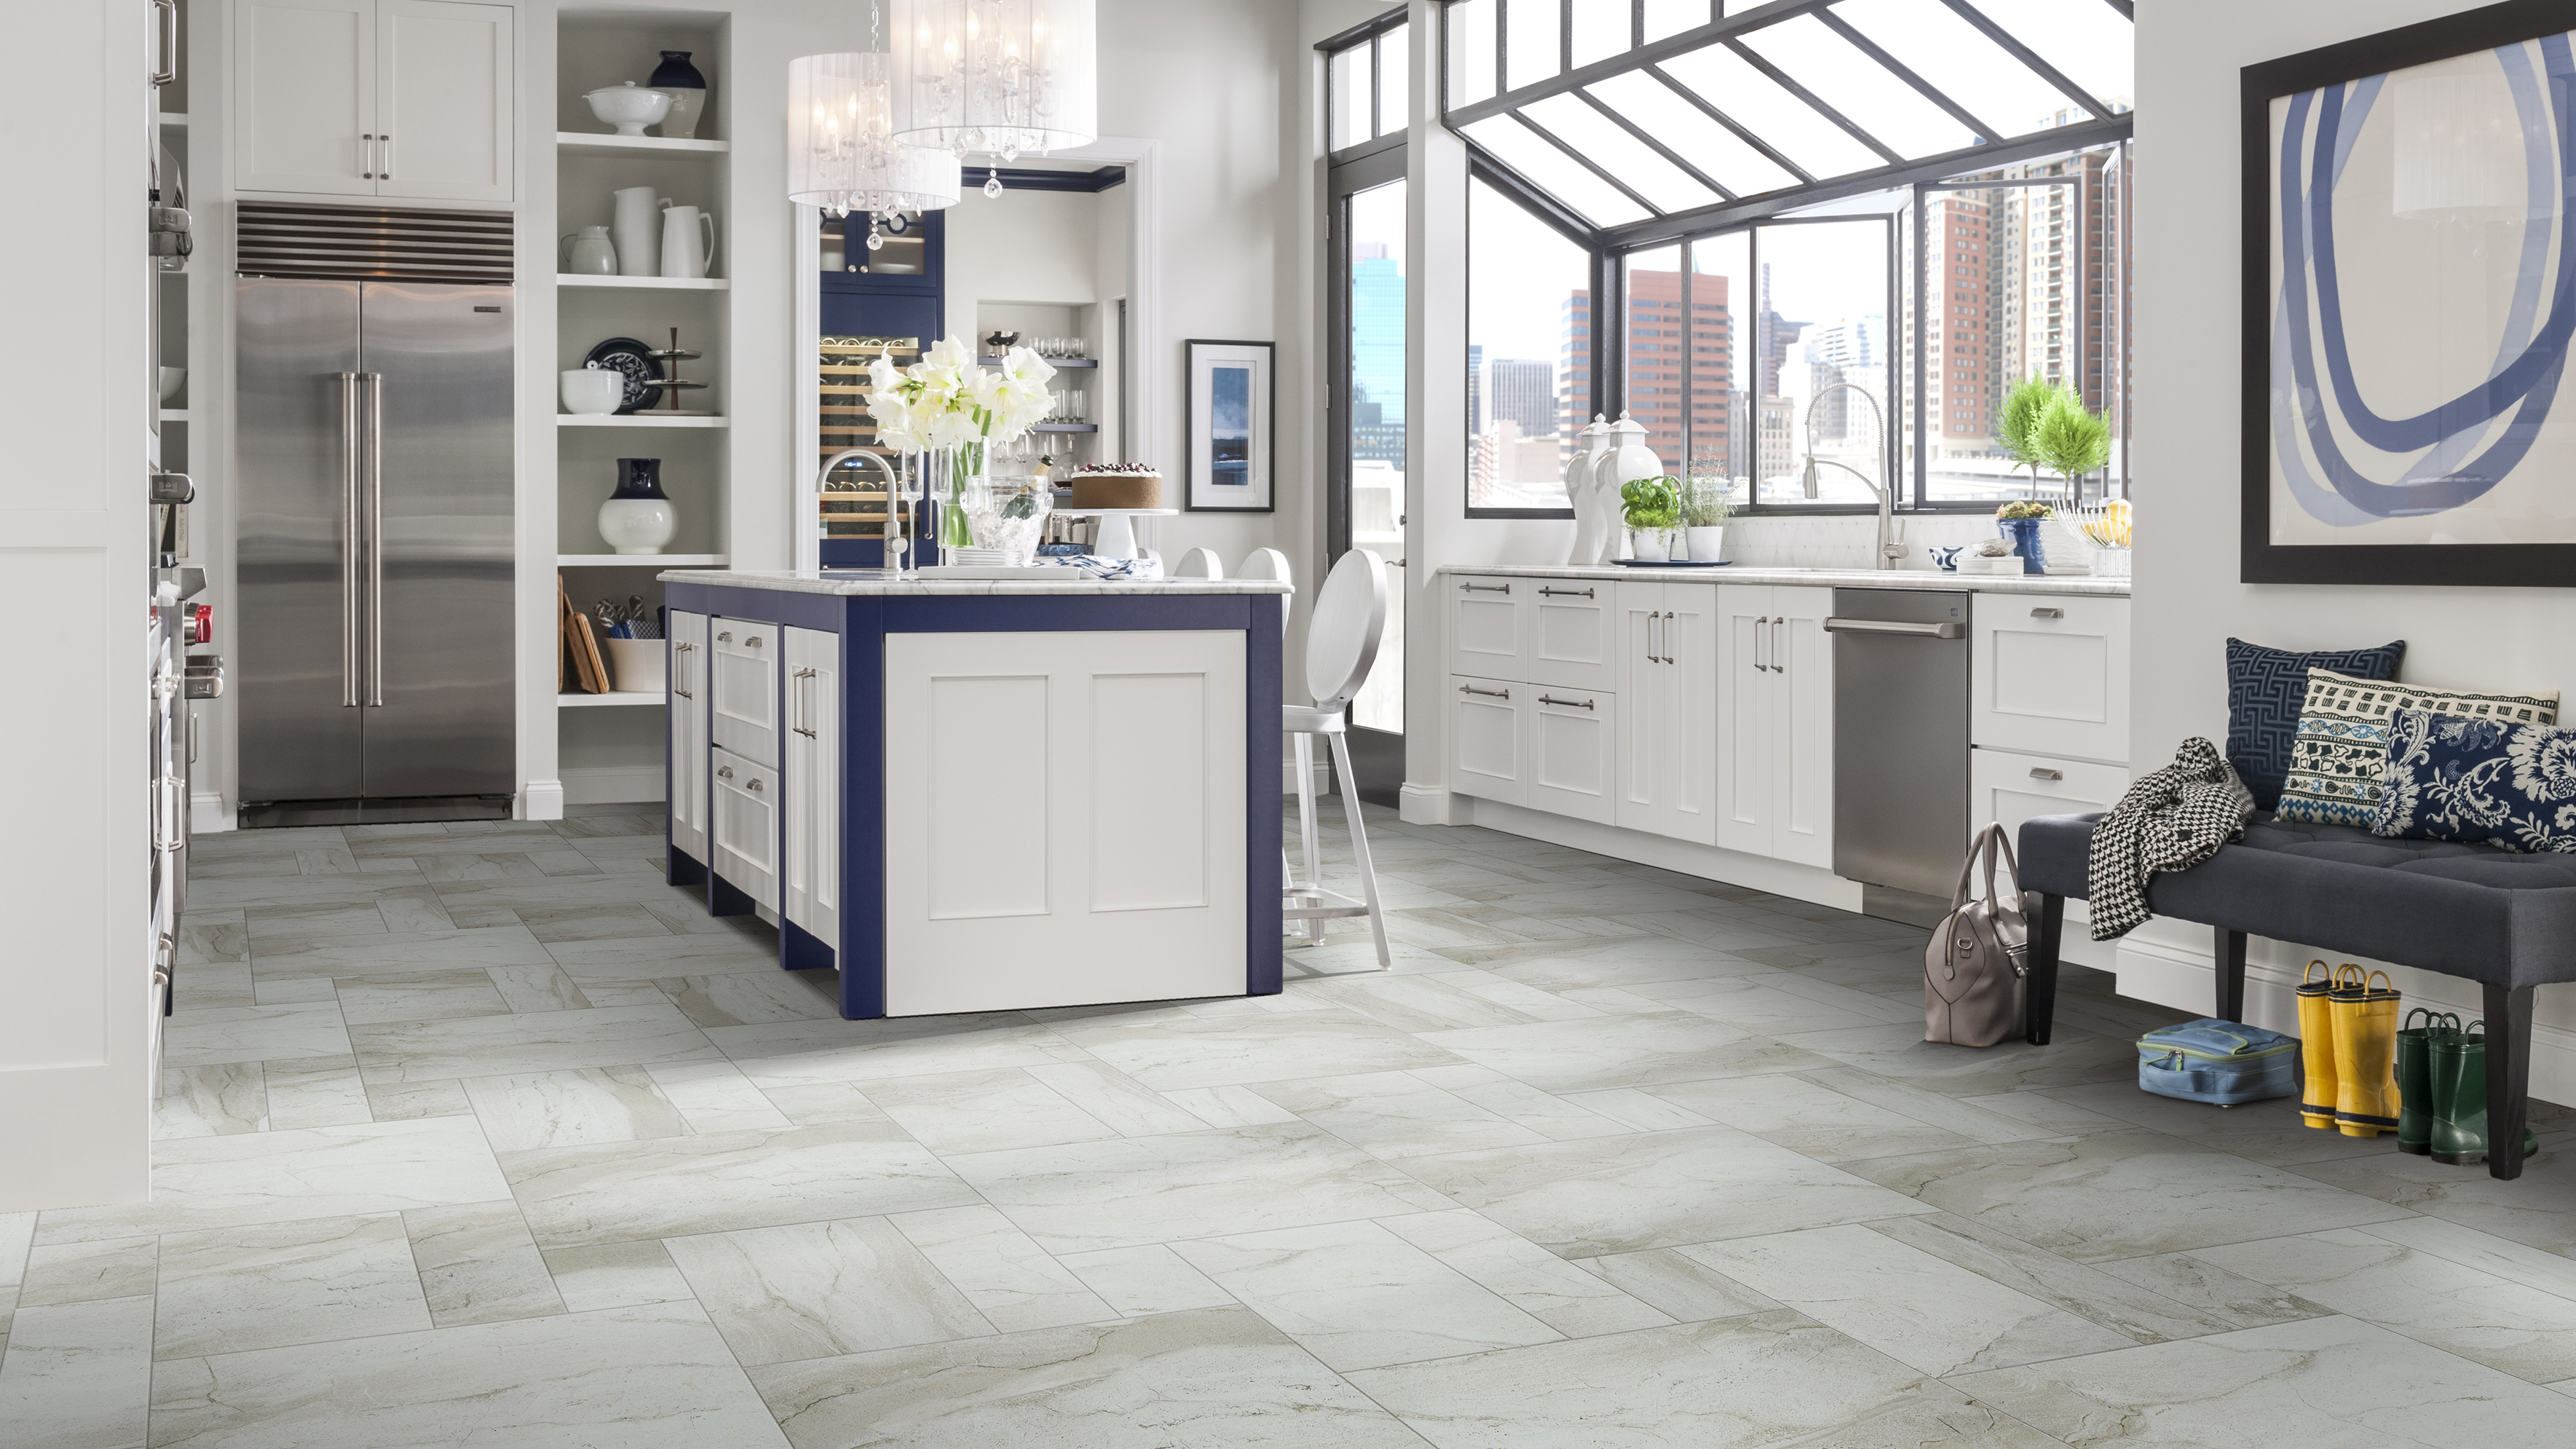 Tile flooring in a kitchen.